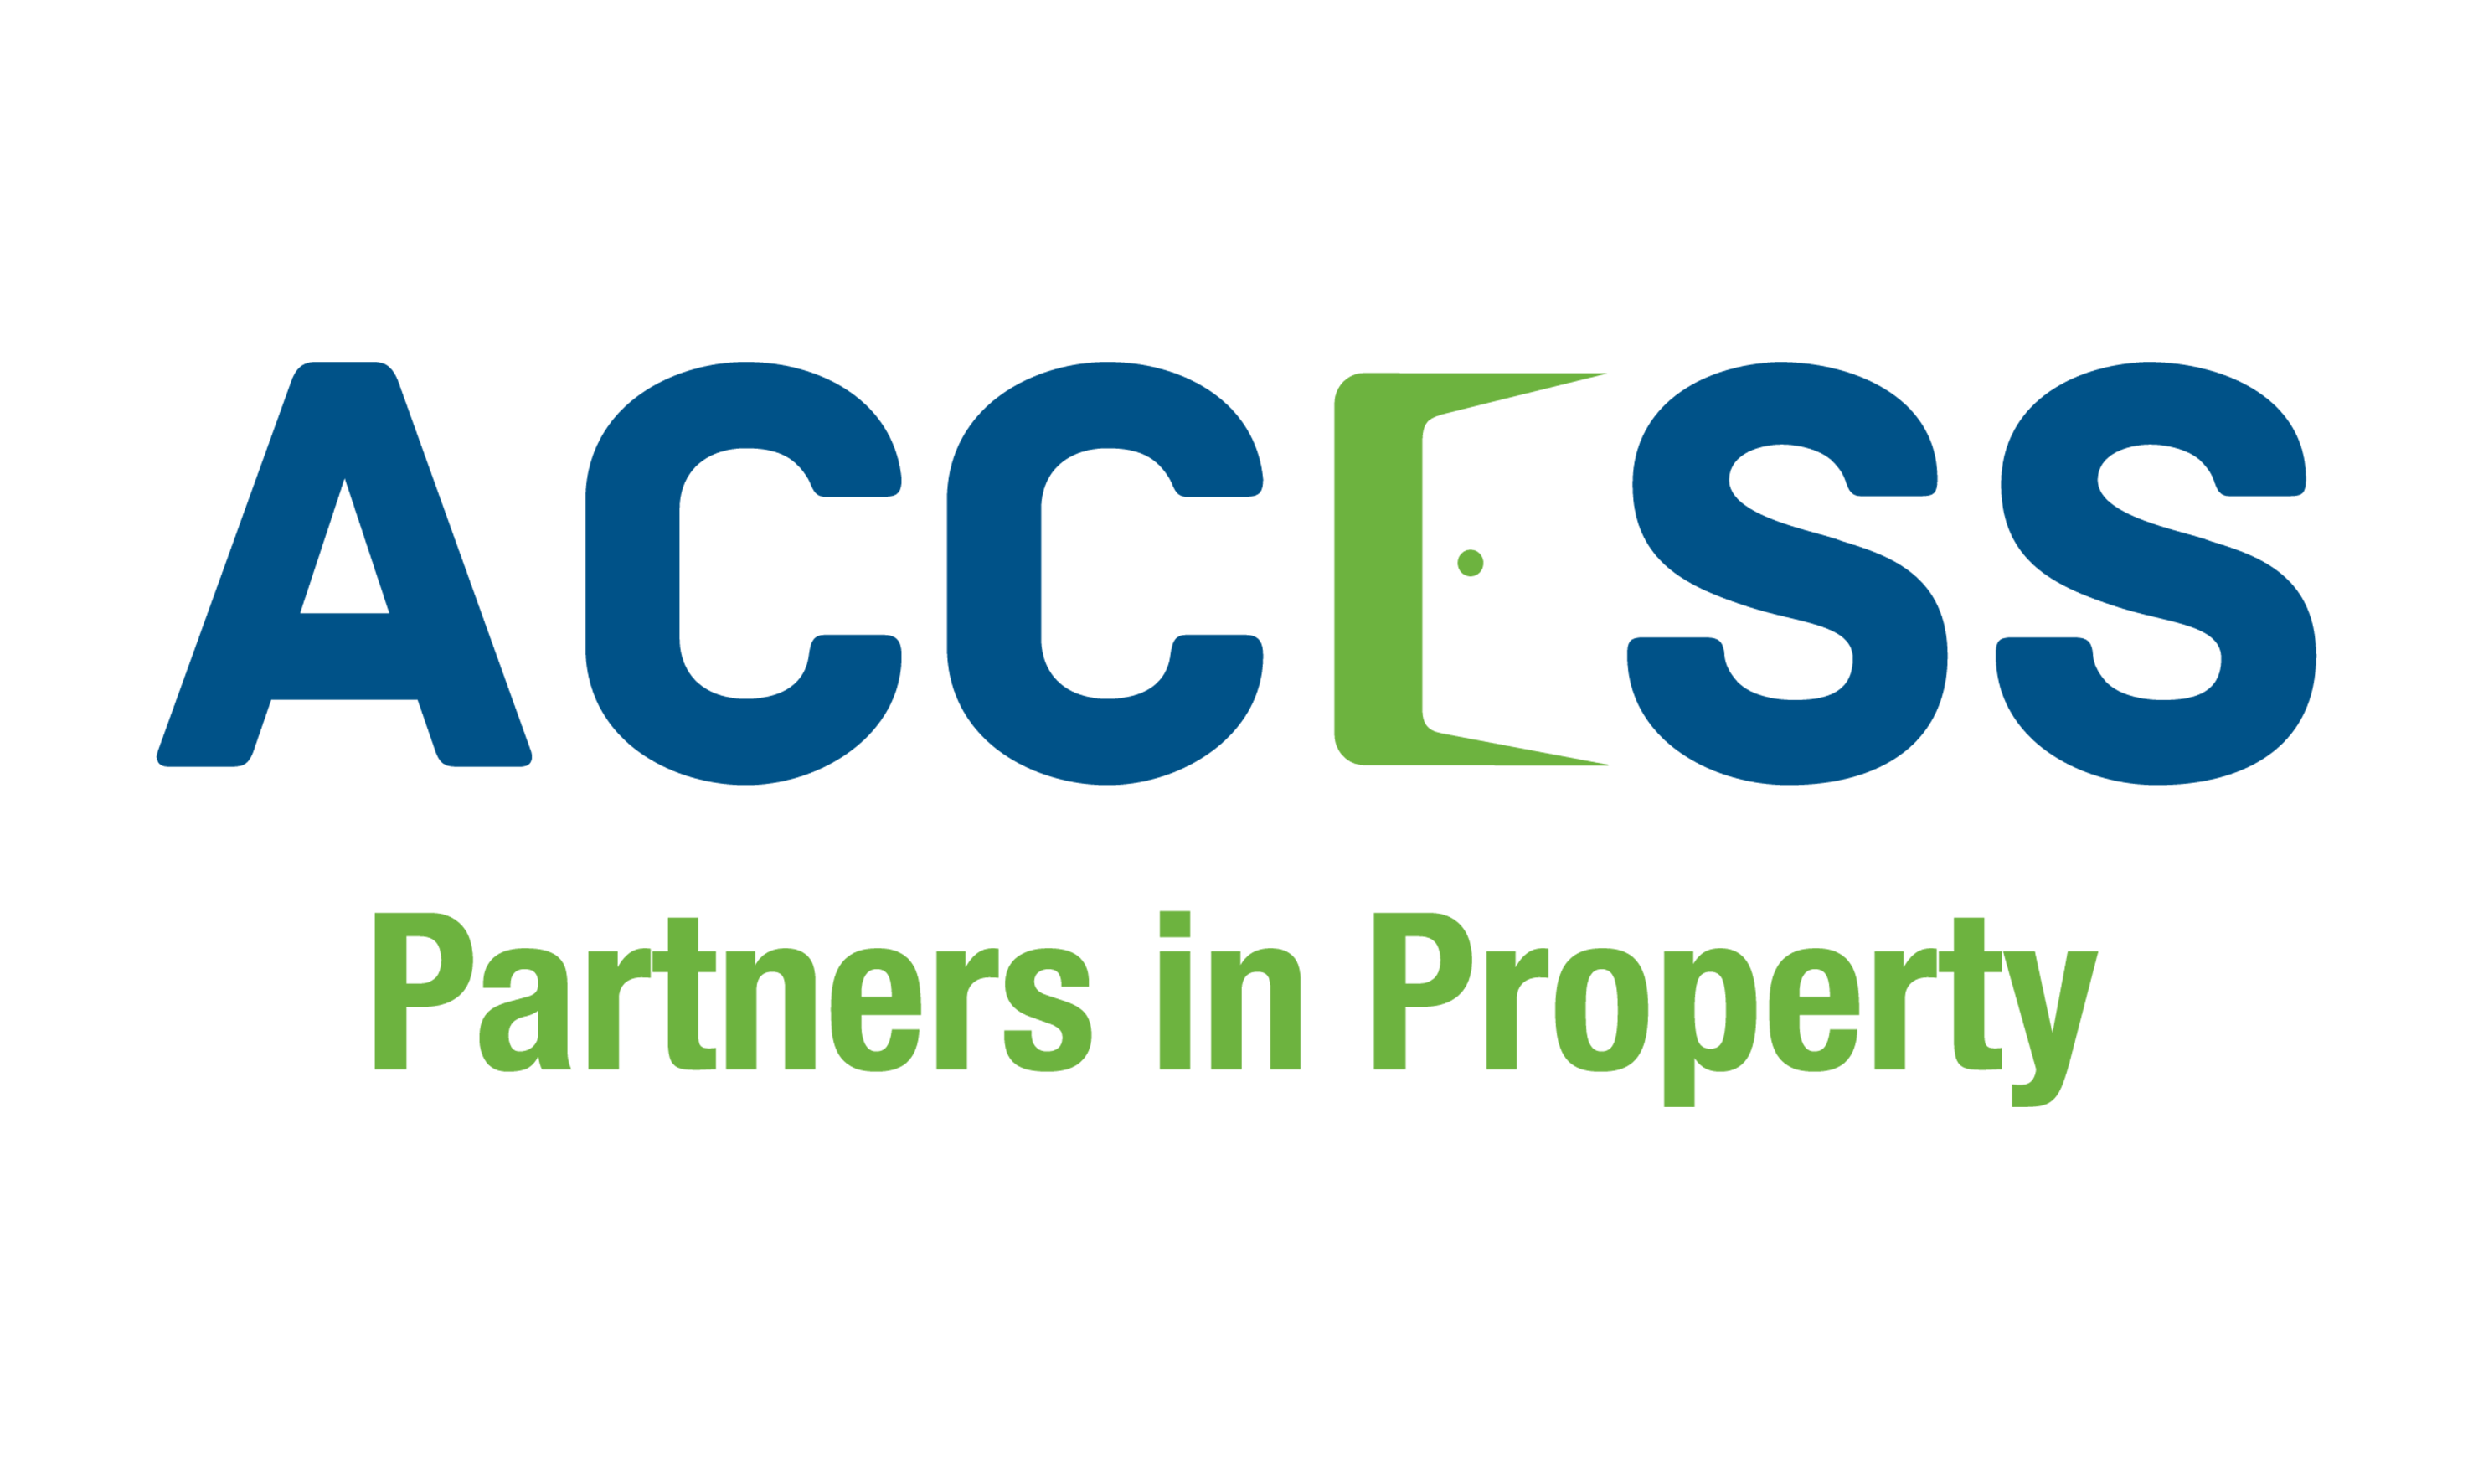 Access | Partners in Property